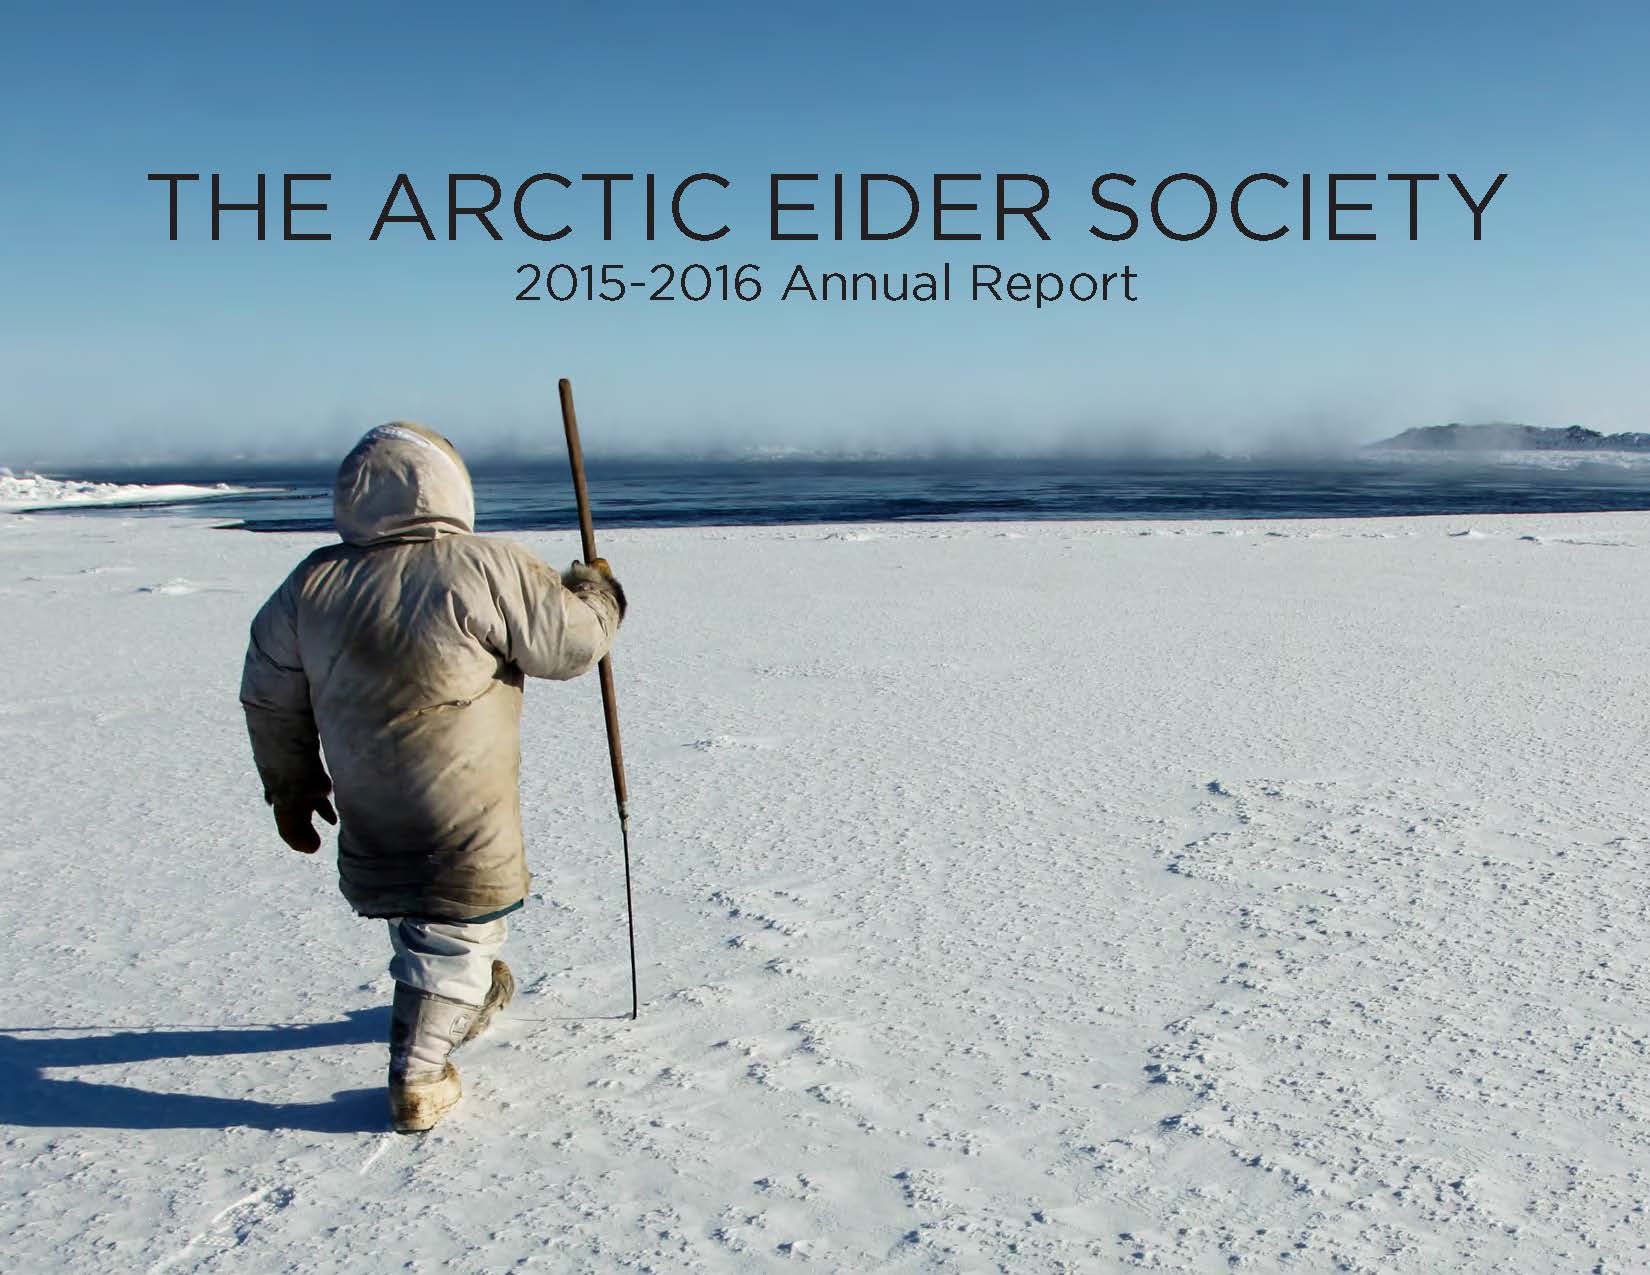 The Arctic Eider Society 2015-2016 Annual Report